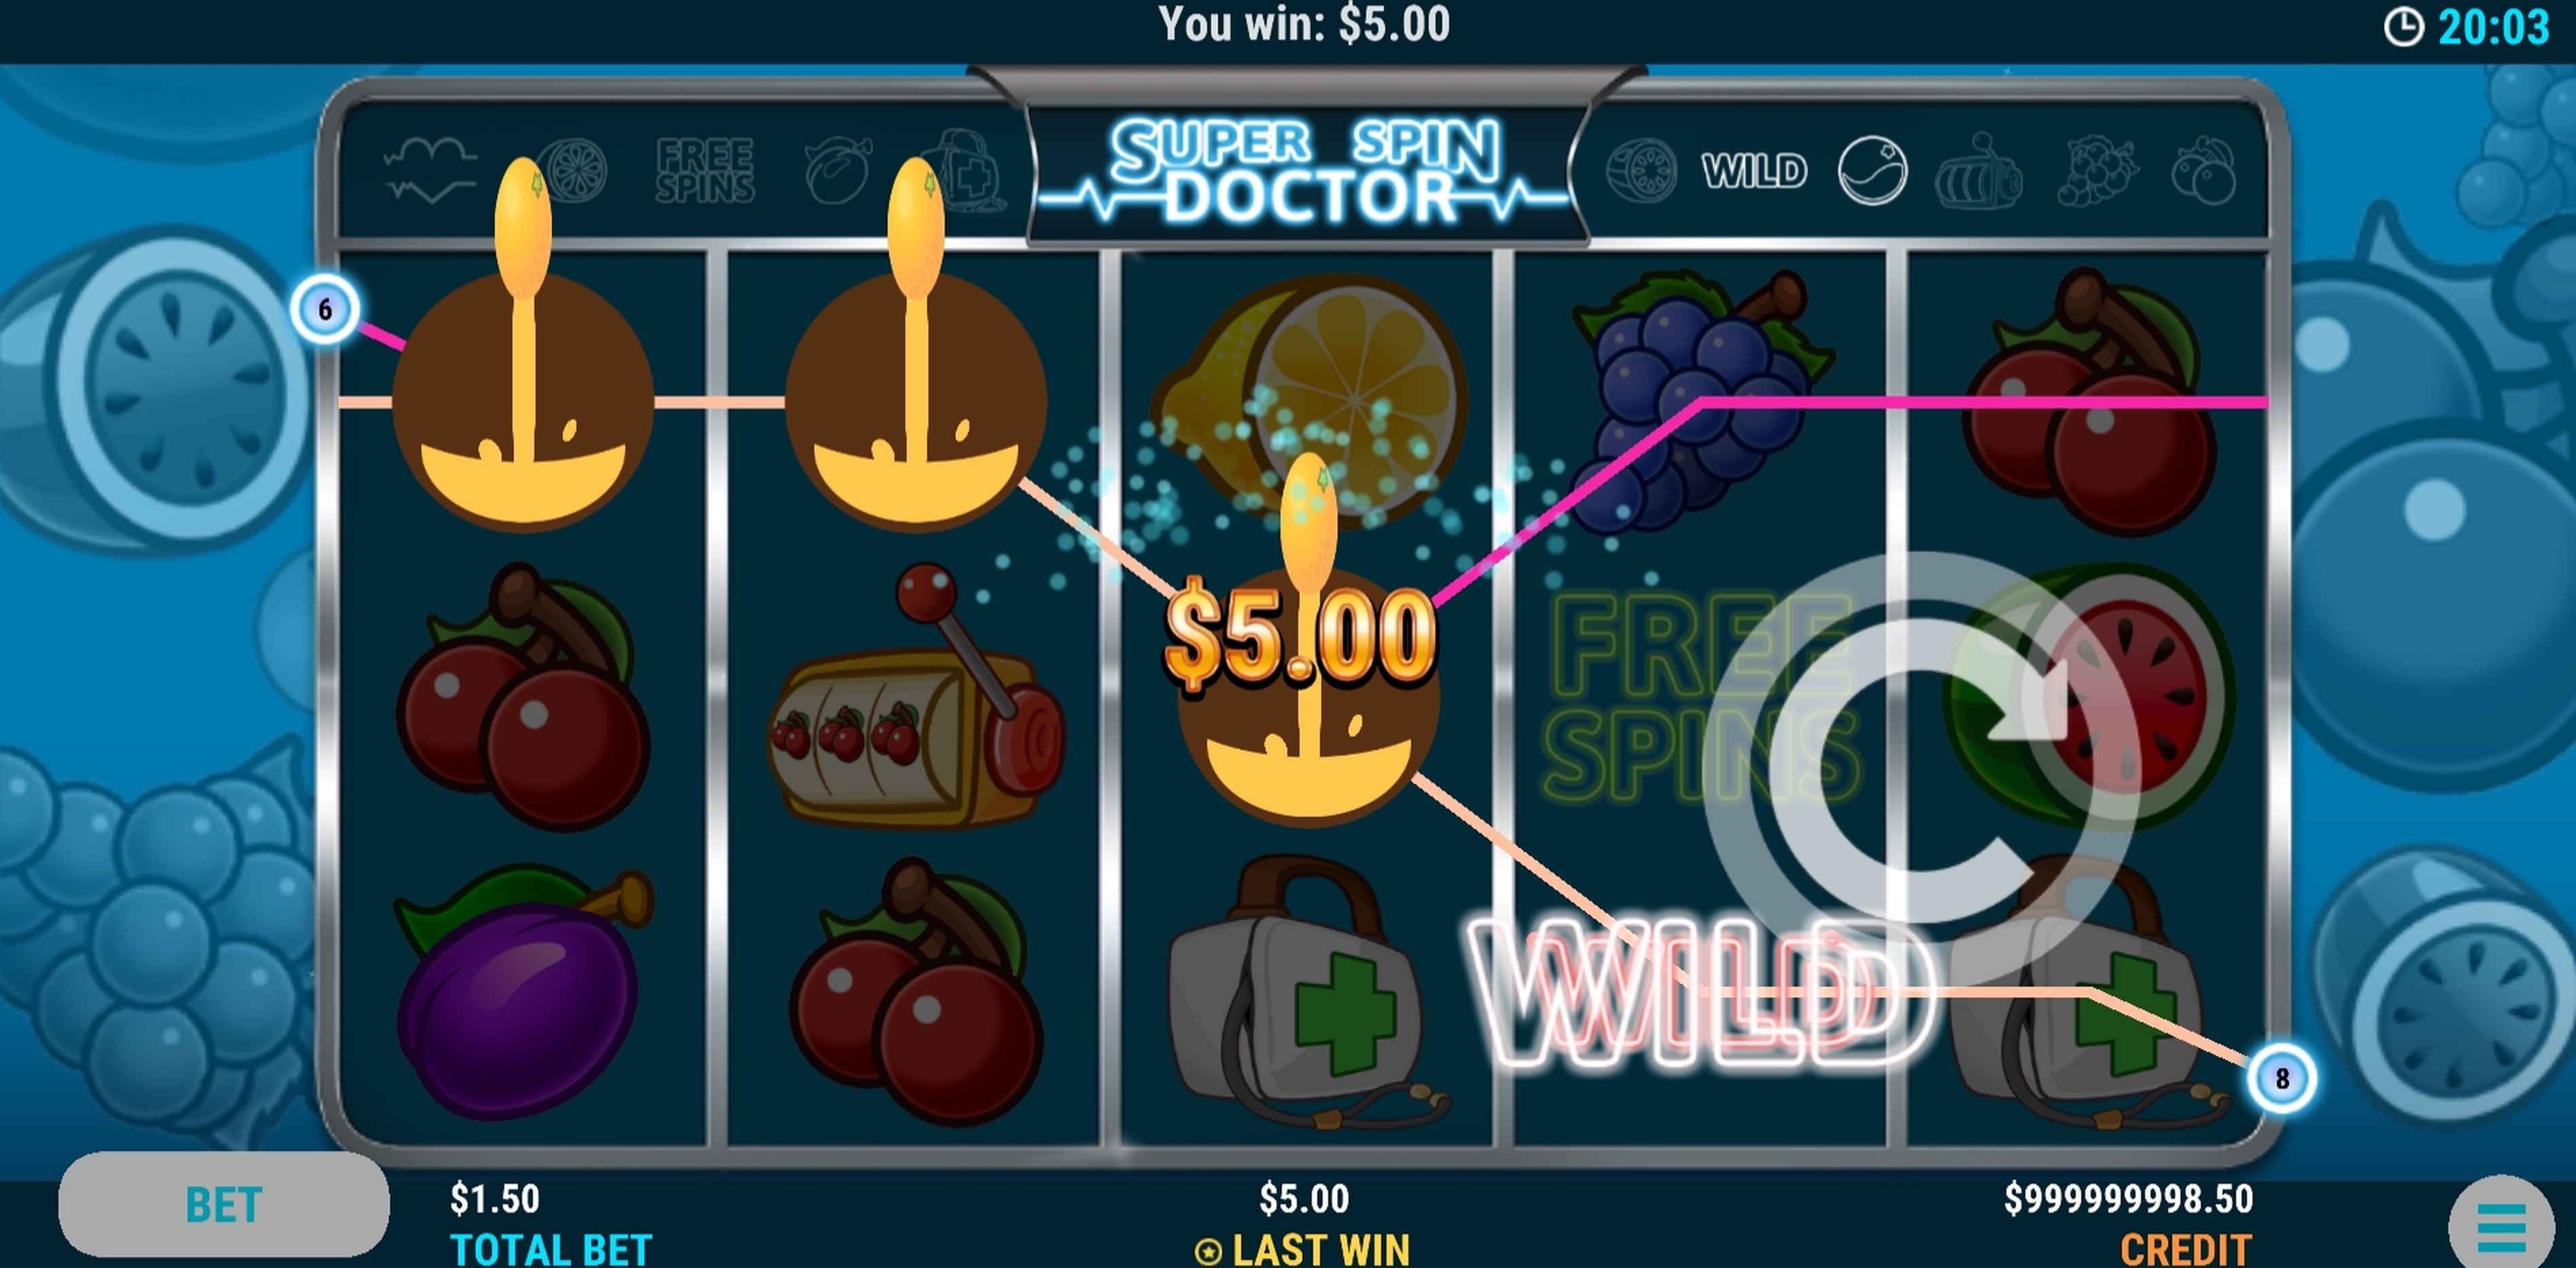 Win Money in Super Spin Doctor Free Slot Game by Slot Factory